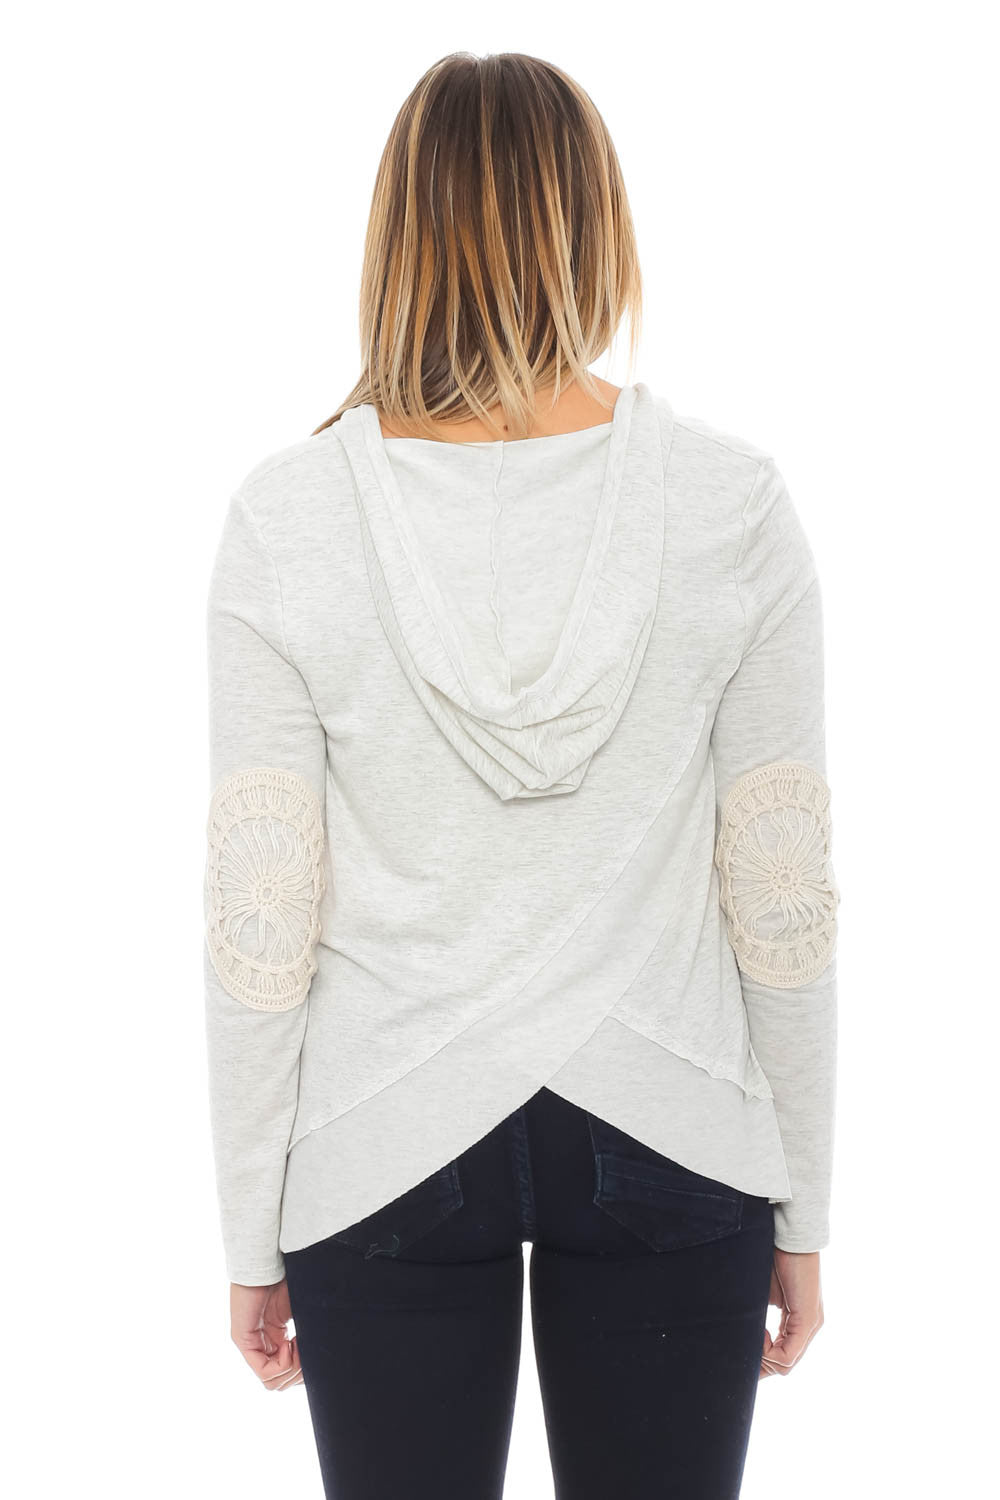 Sweater - Overlap Back Hoodie with Lace Elbow Patches by Paper Crane